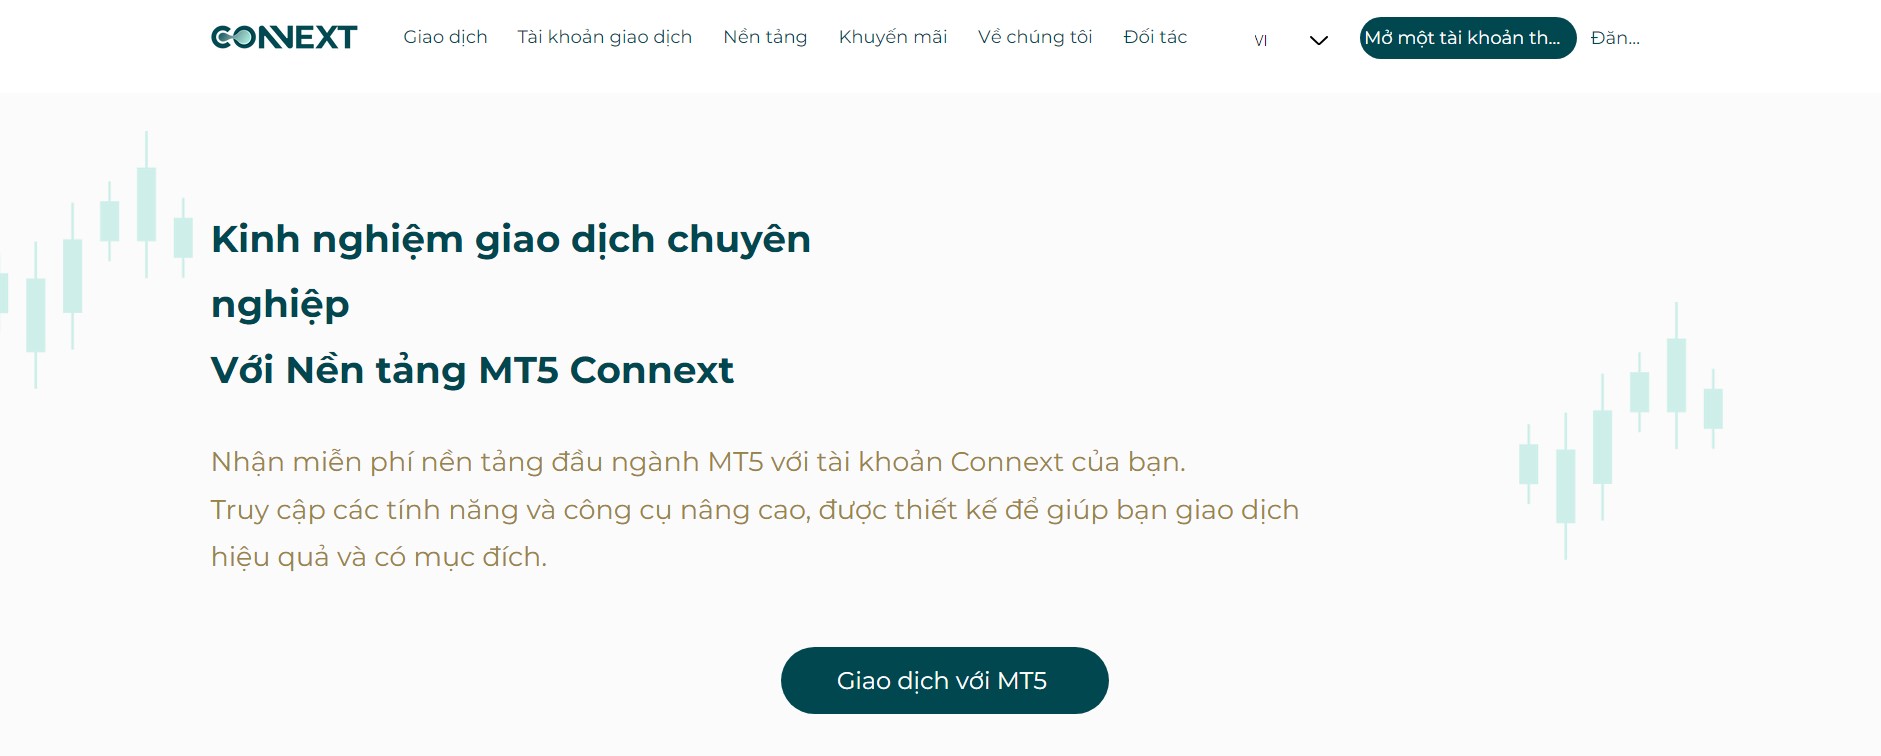 Connext hỗ trợ nền tảng giao dịch MT5 quen thuộc với trader (Nguồn: Connext)